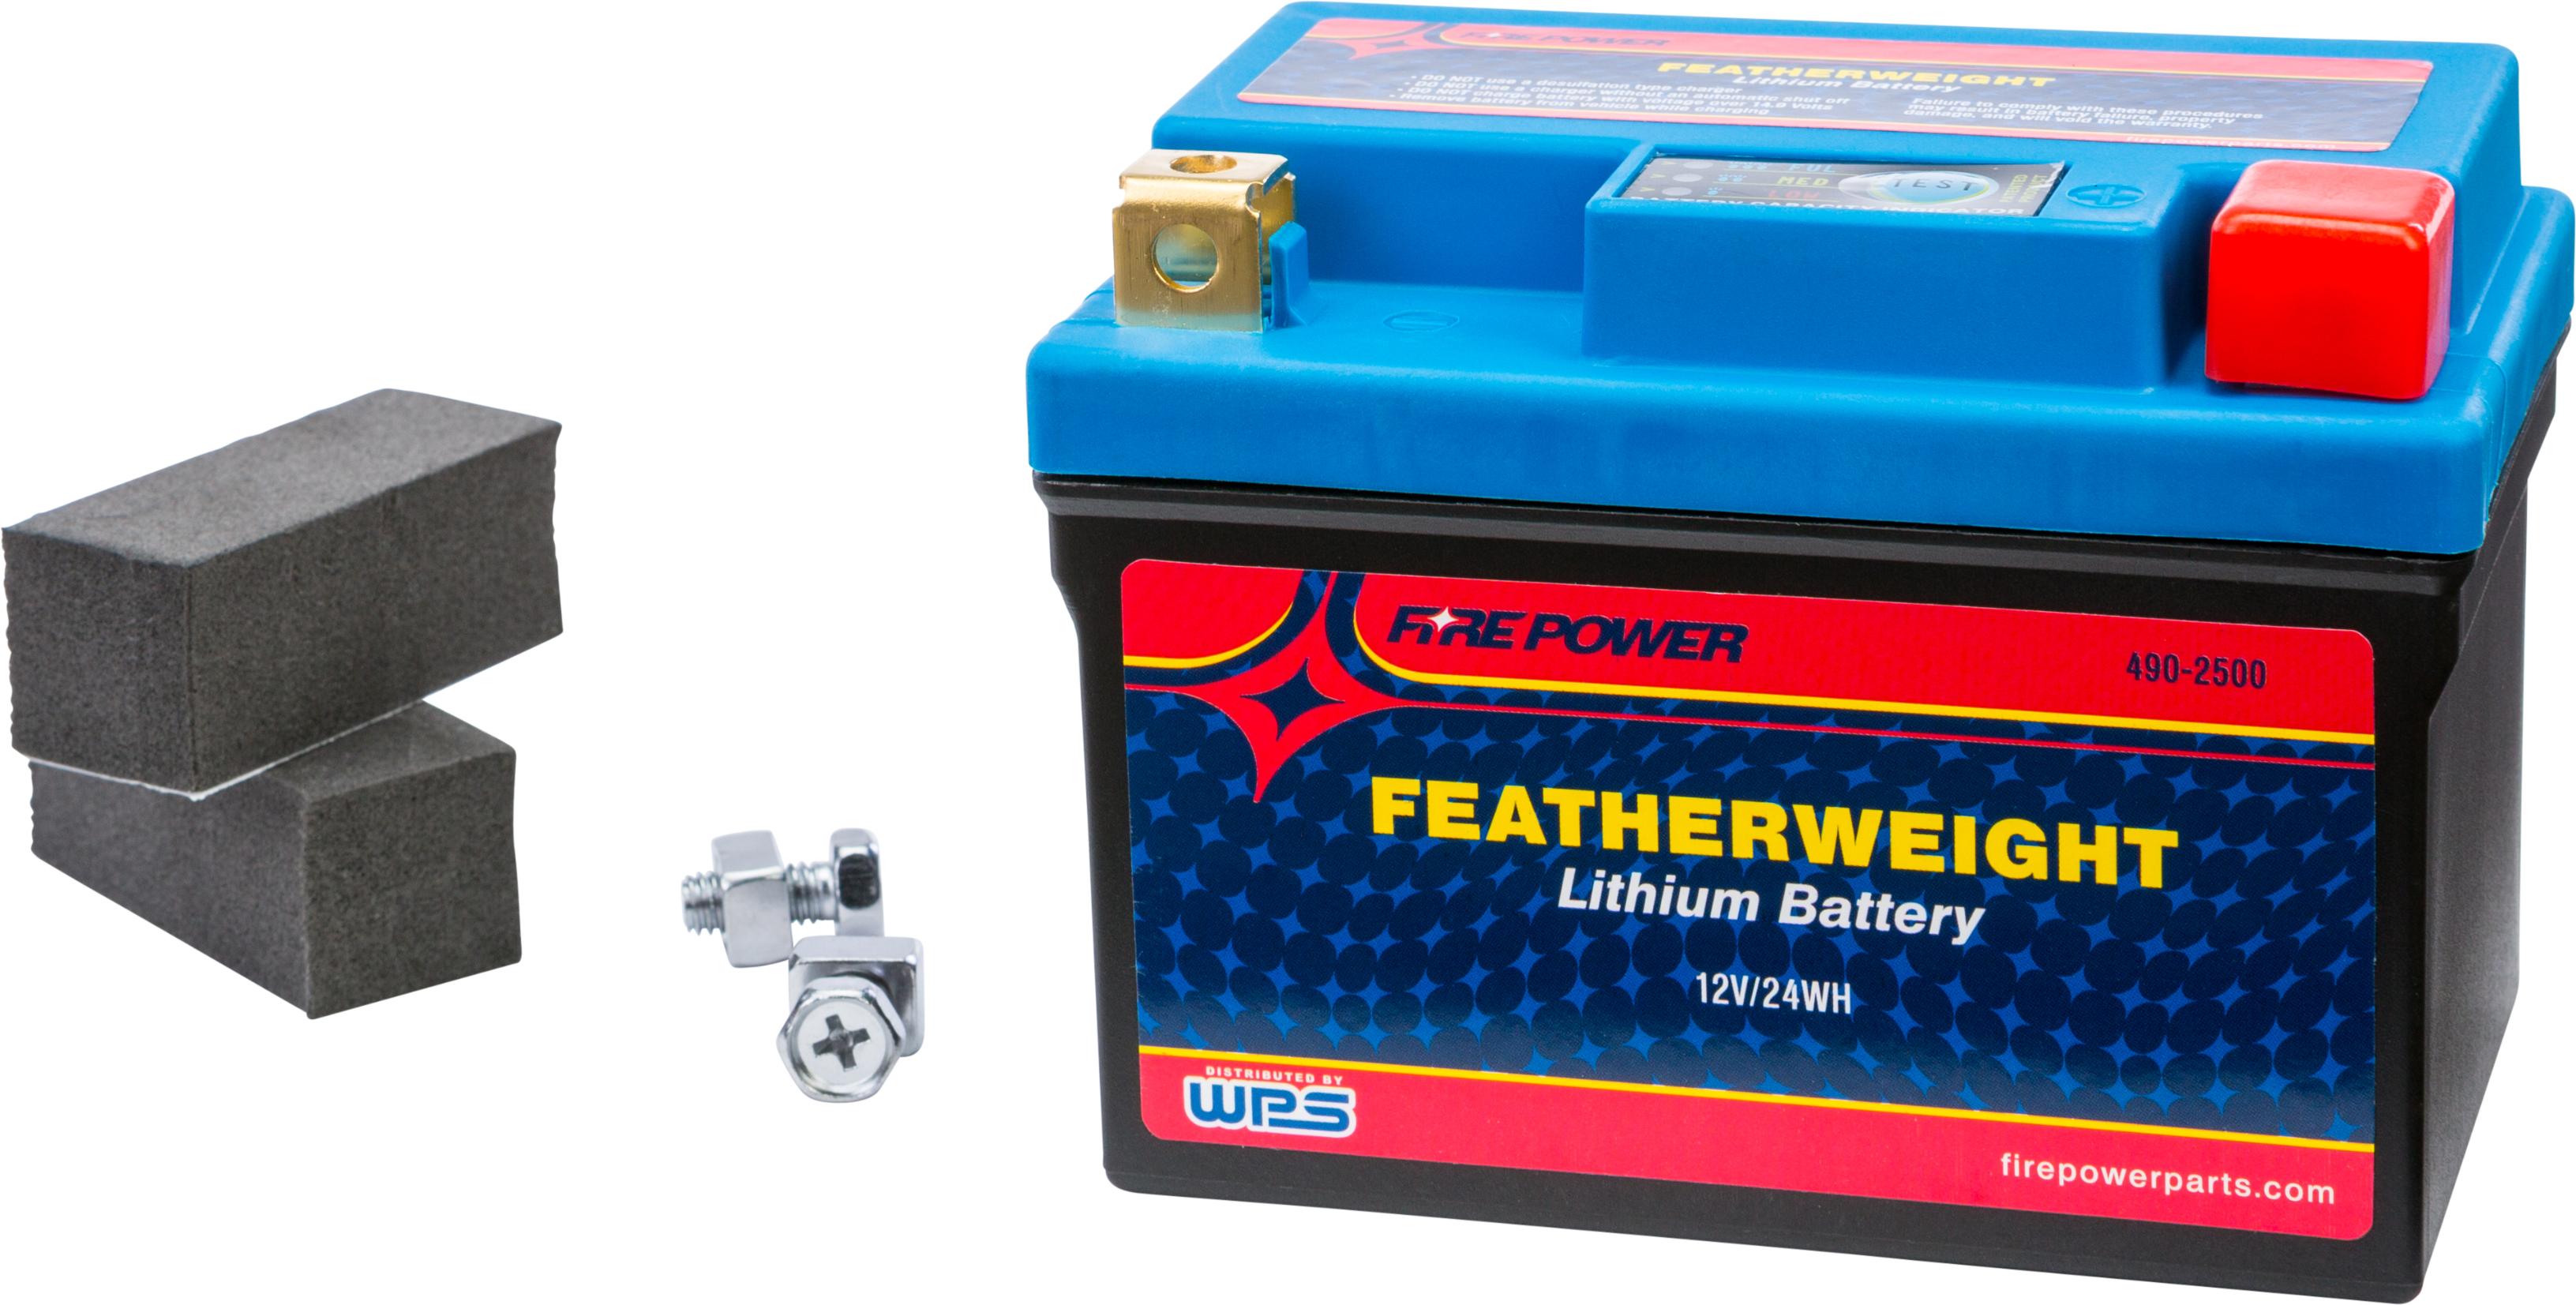 Fire Power - Featherweight Lithium Battery 120 Cca Hjtz5s-fp-il 12v/24wh - HJTZ5S-FP